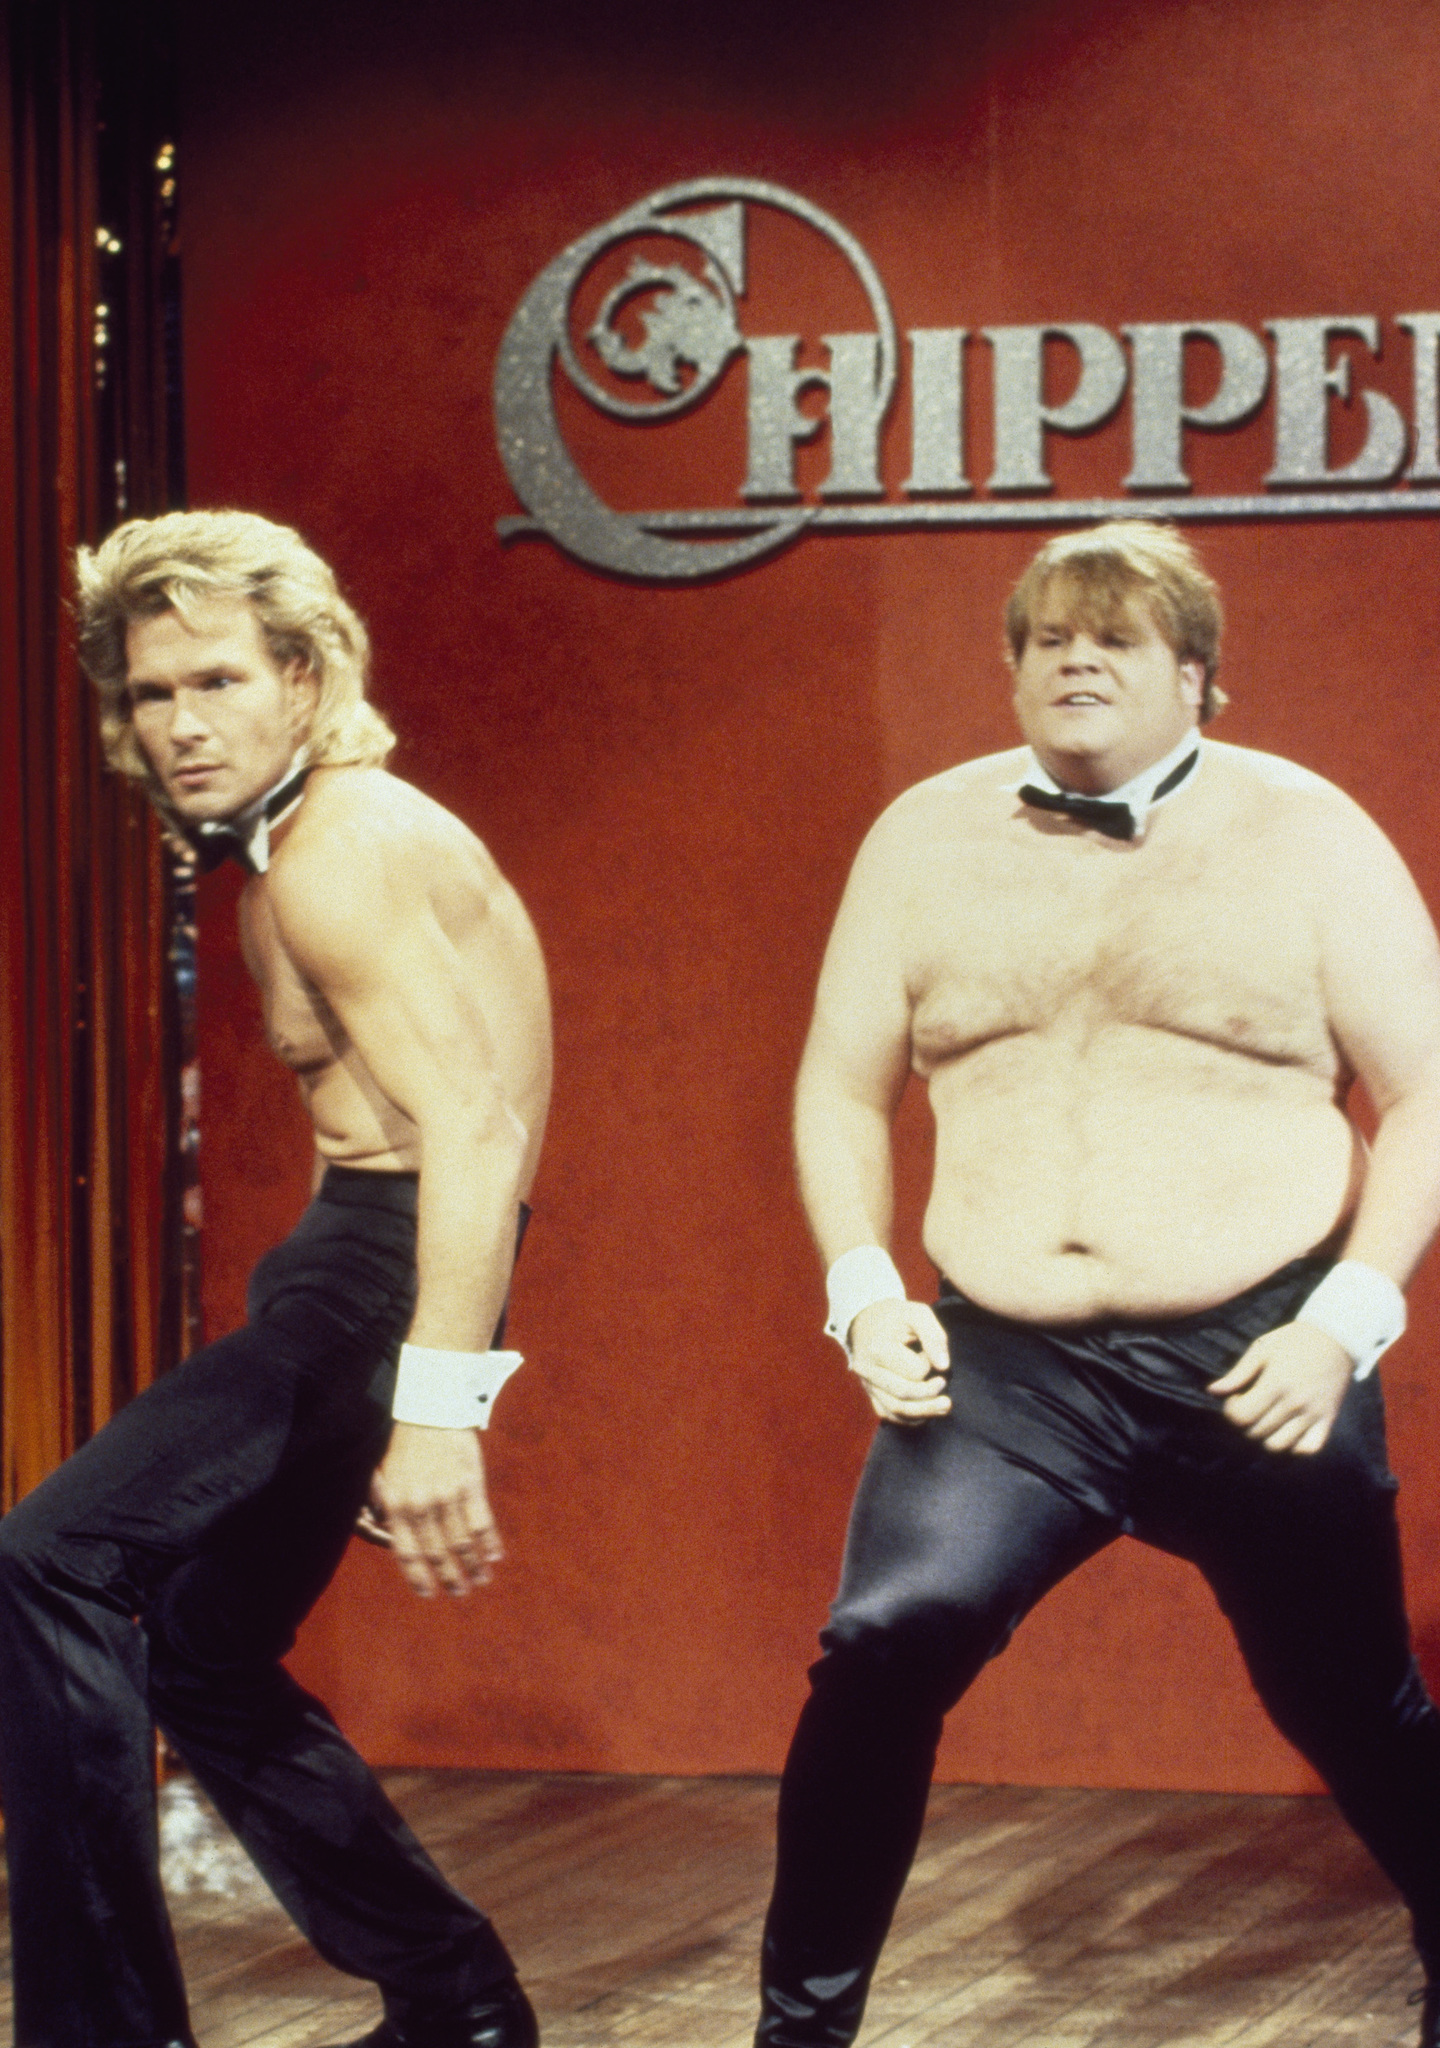 Chris Farley and Patrick Swayze at event of Saturday Night Live (1975)